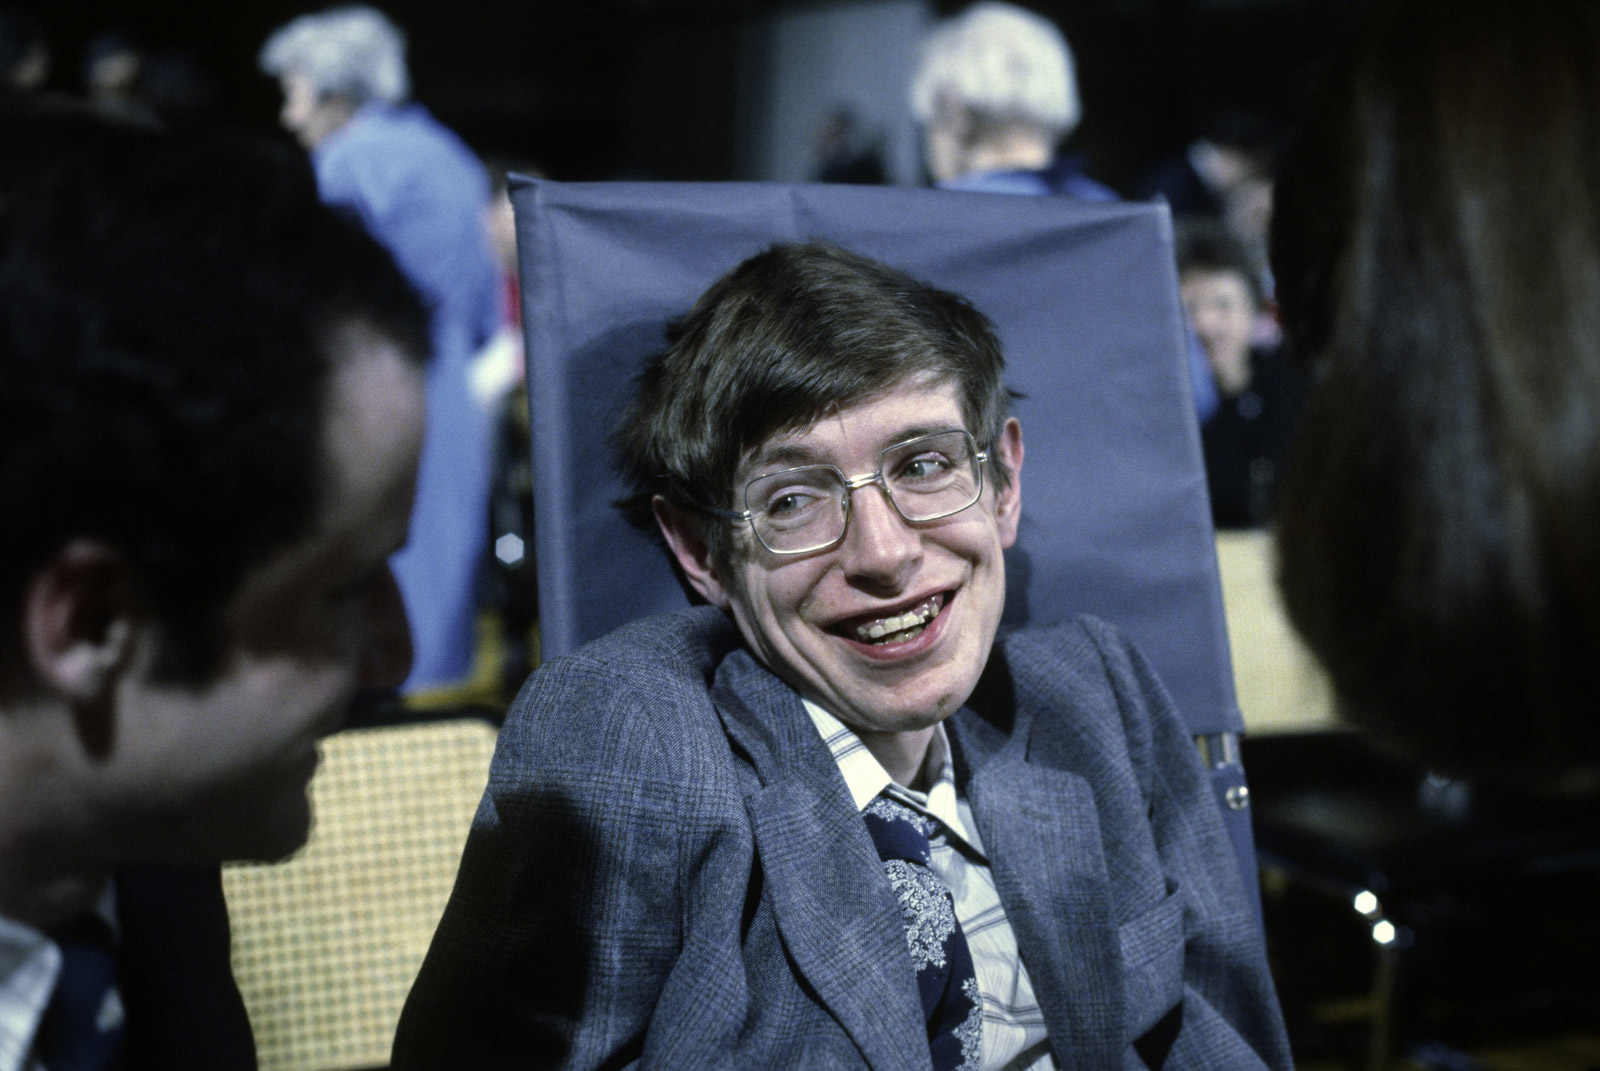 Stephen Hawking dressed in blue suit with matching blue tie smiling into camera